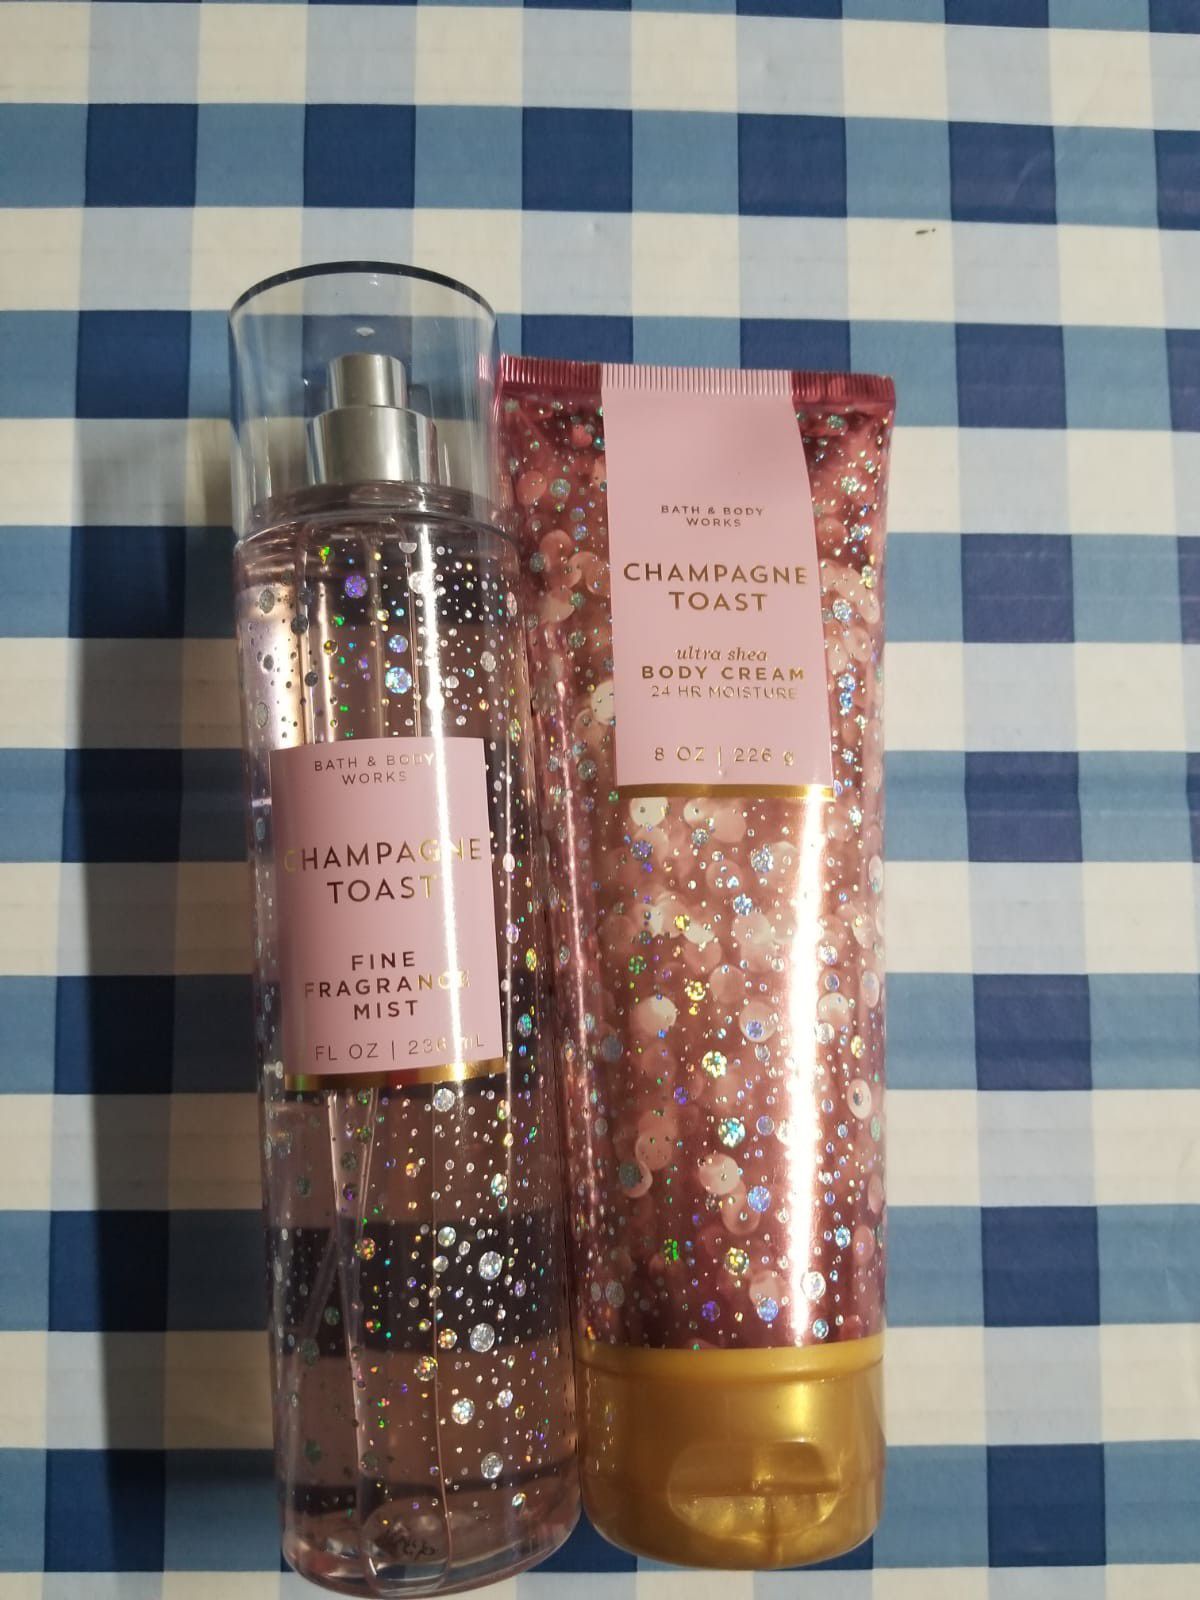 Bath and Body Works Champagne Toast set